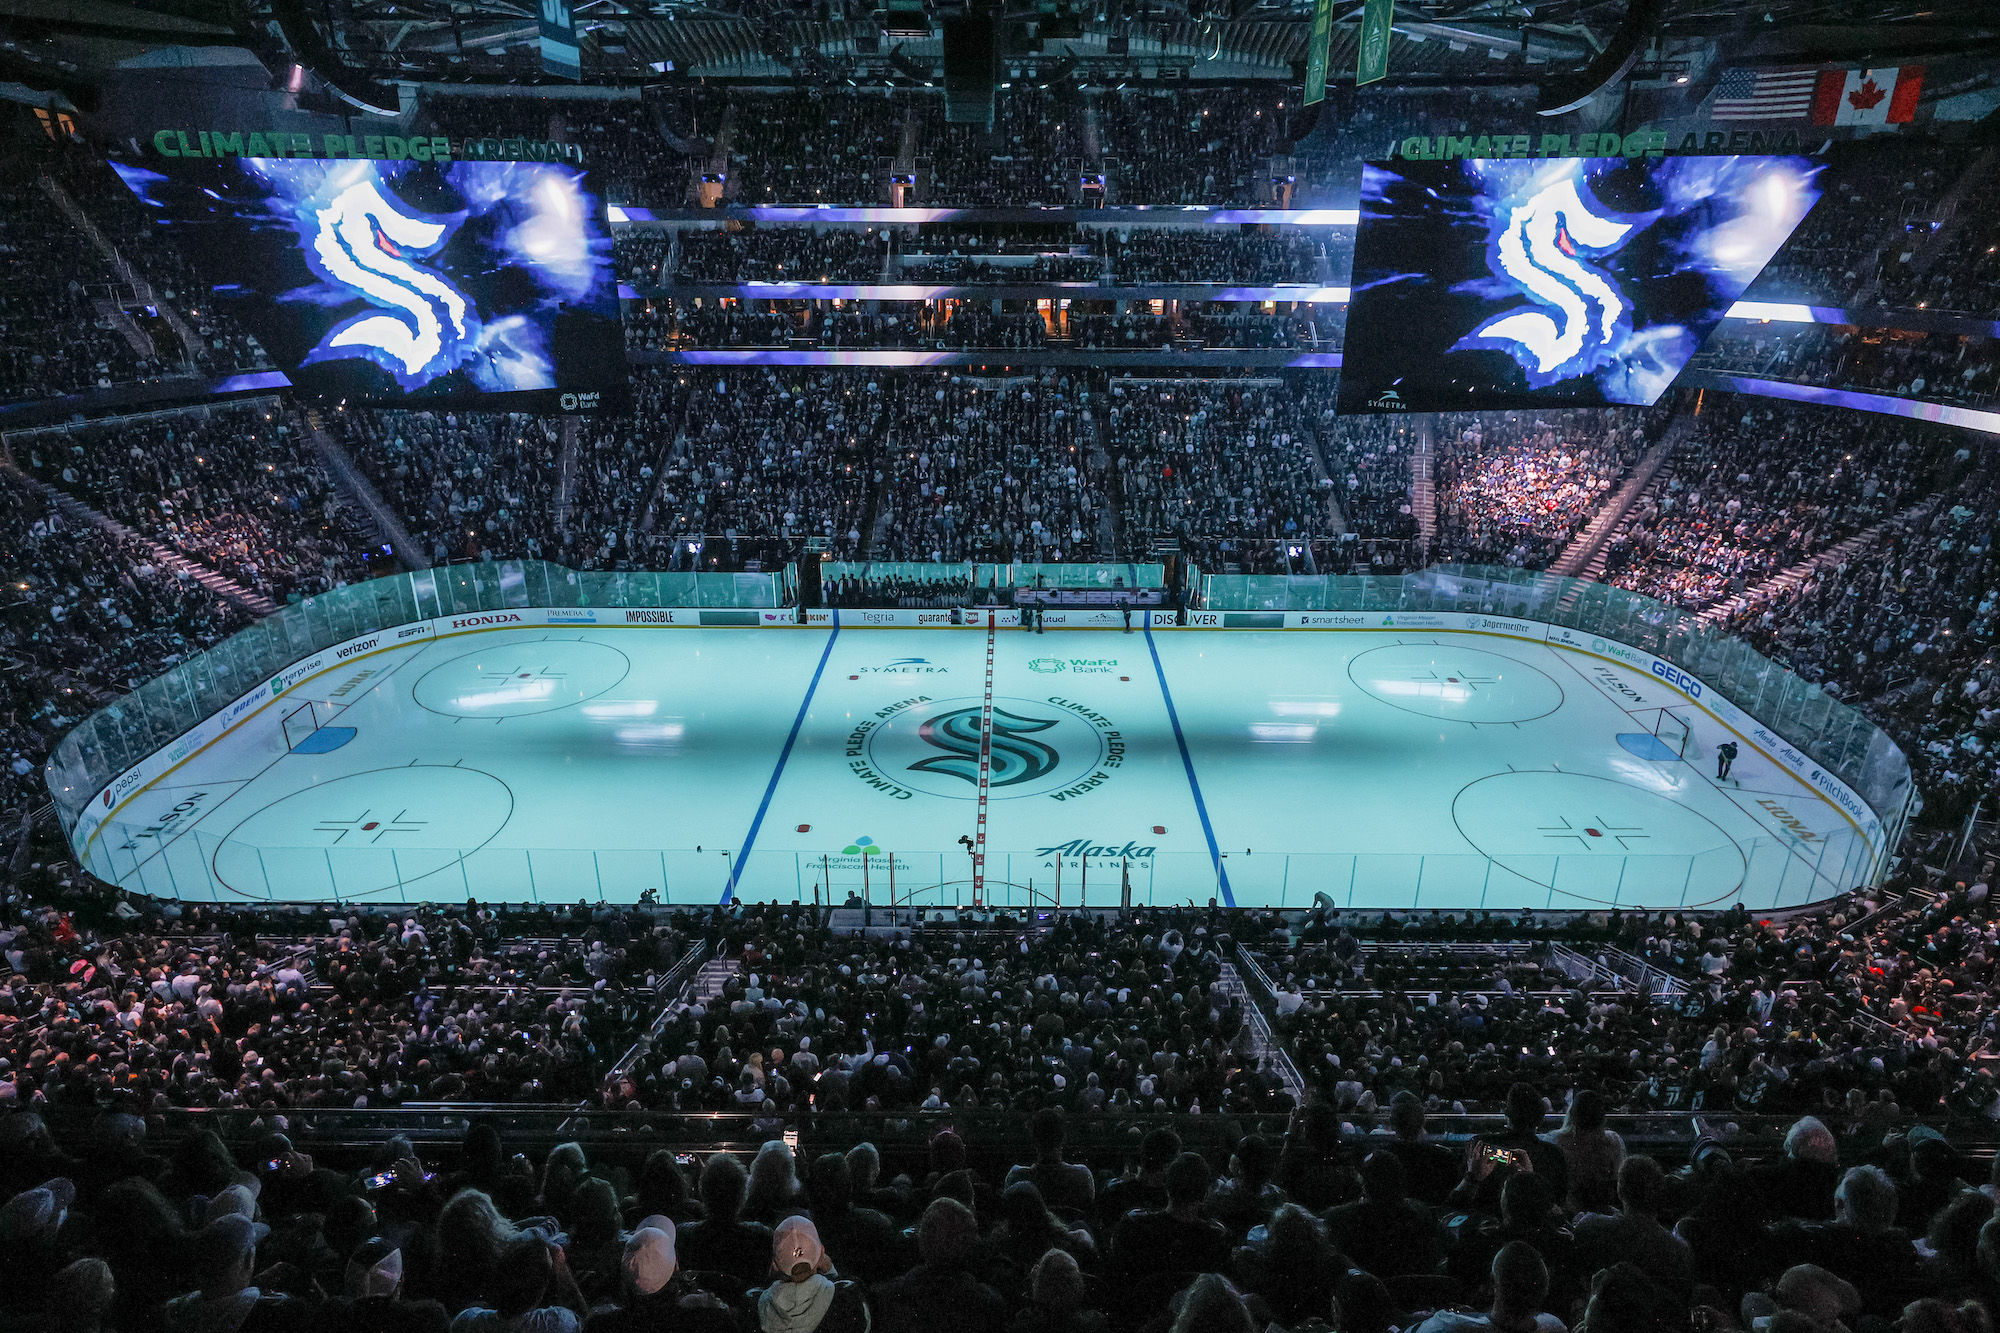 SEATTLE, WASHINGTON - OCTOBER 23: A general view of Climate Pledge Arena with the center ice logo prior to the Kraken's inaugural home opening game between the Seattle Kraken and the Vancouver Canucks on October 23, 2021 in Seattle, Washington. (Photo by Steph Chambers/Getty Images)